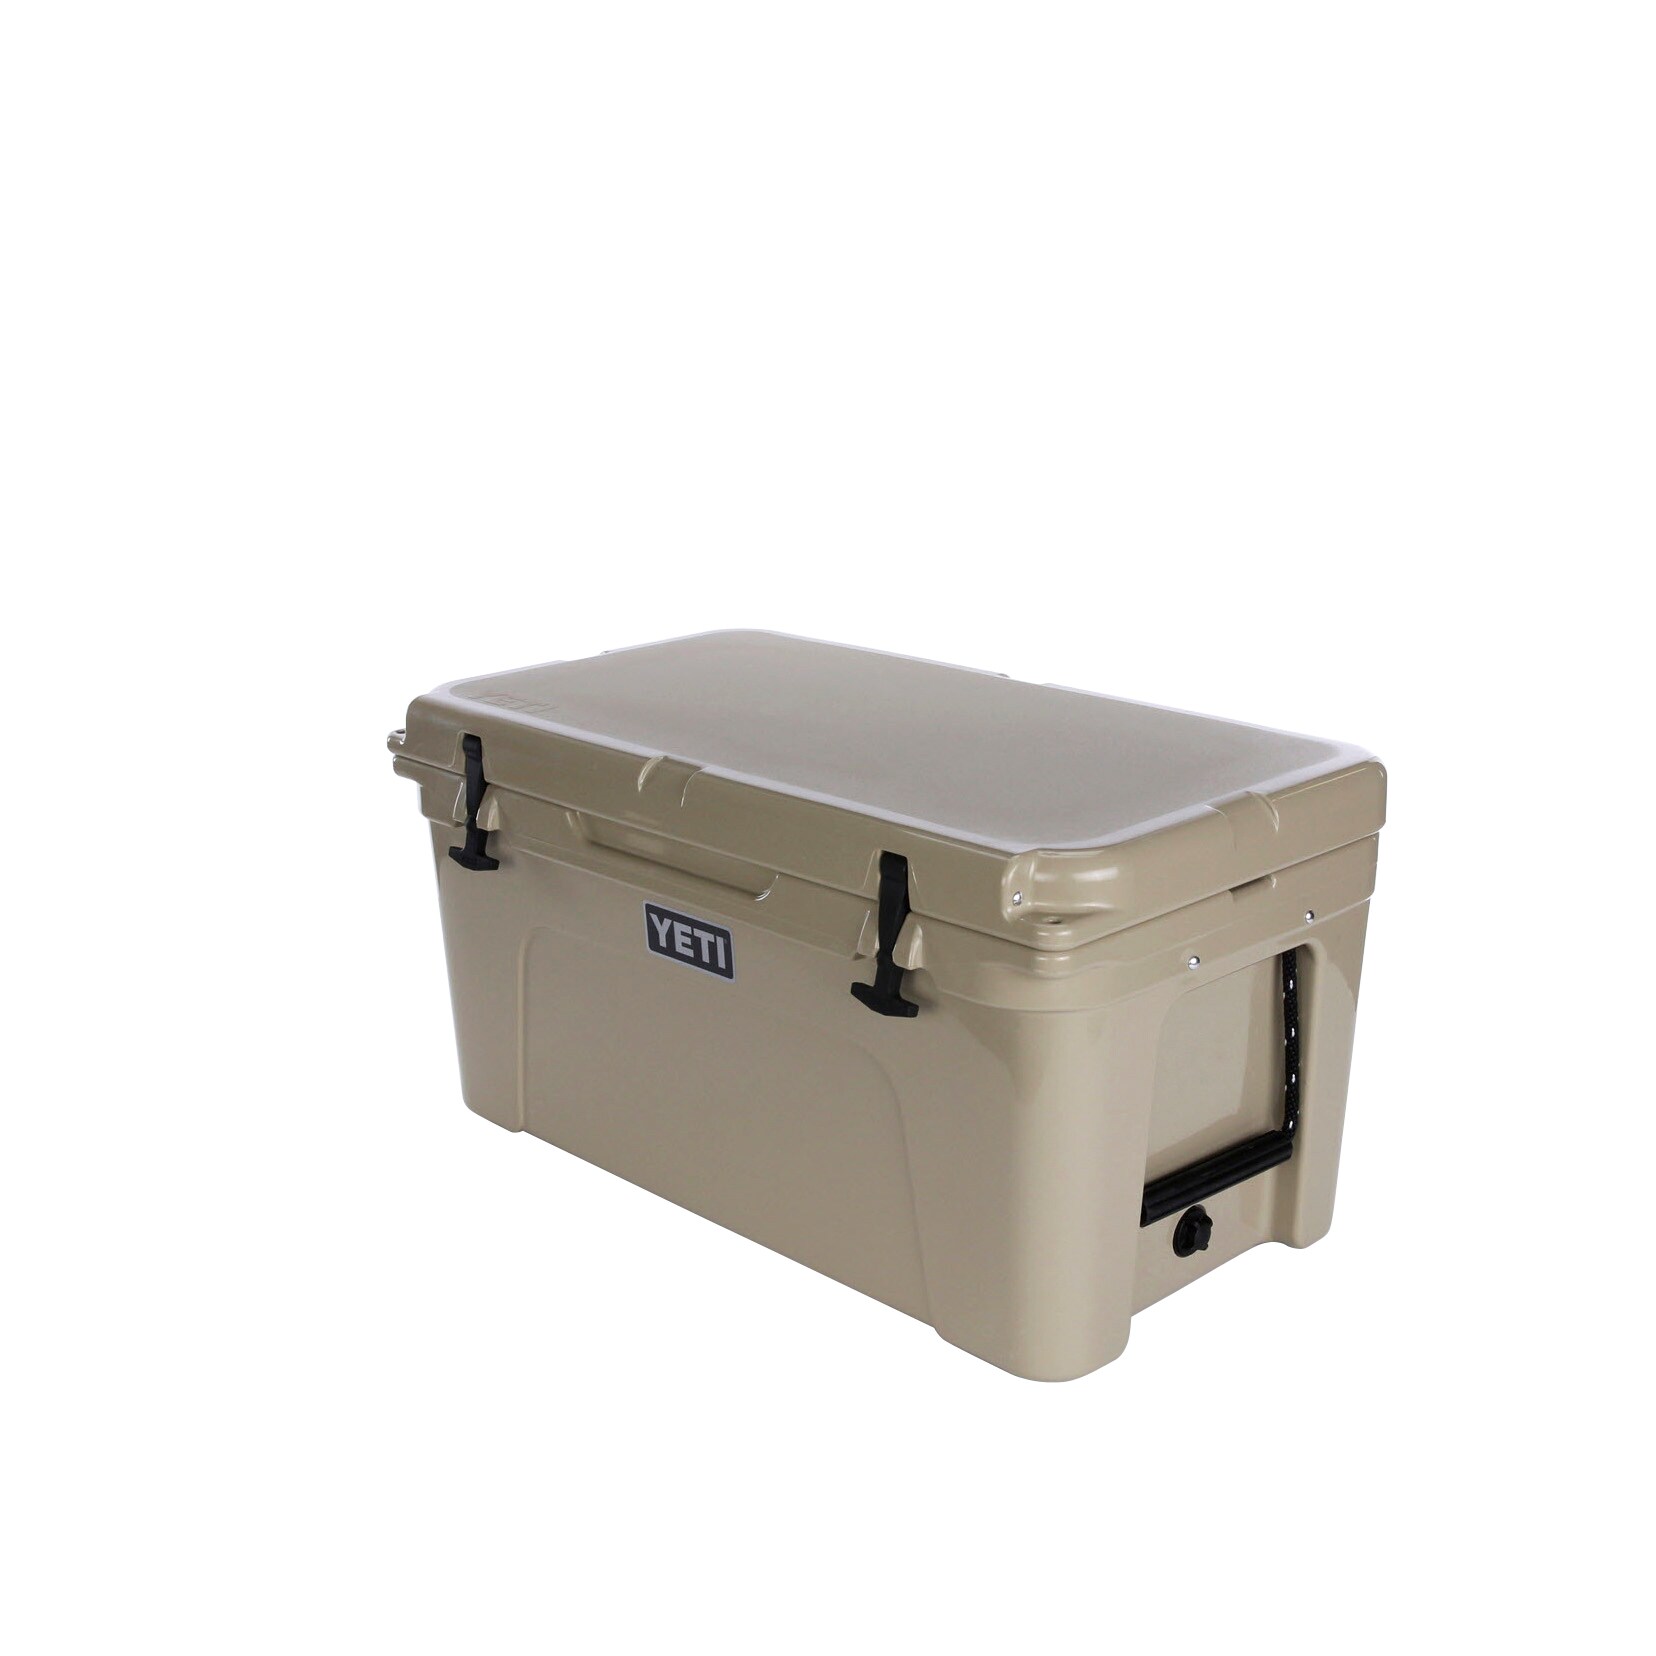 YETI Tundra 65 Insulated Chest Cooler, Tan at